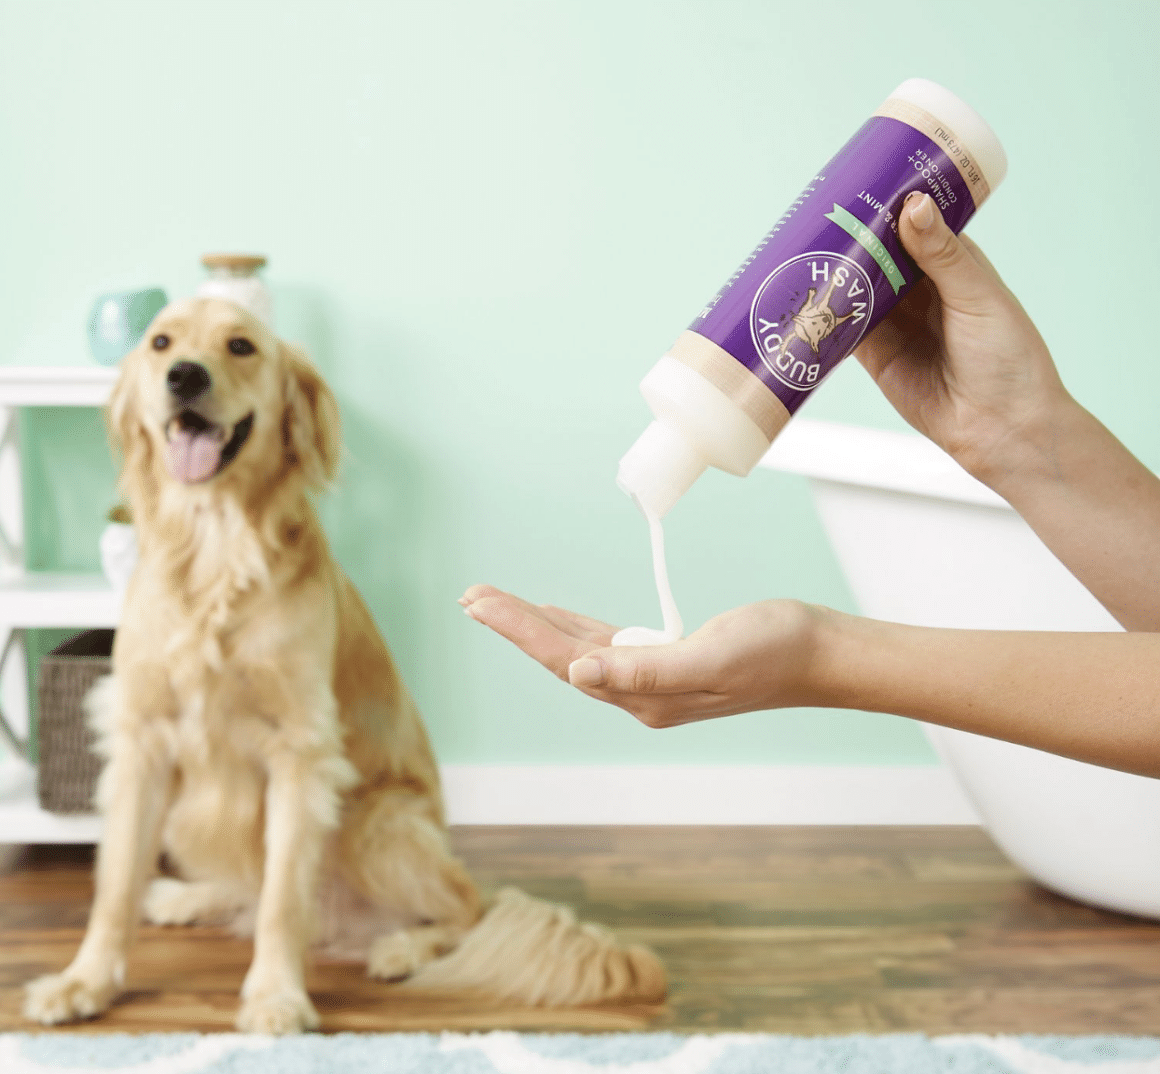 The 5 Best Dog Shampoos and Conditioners for Golden ...